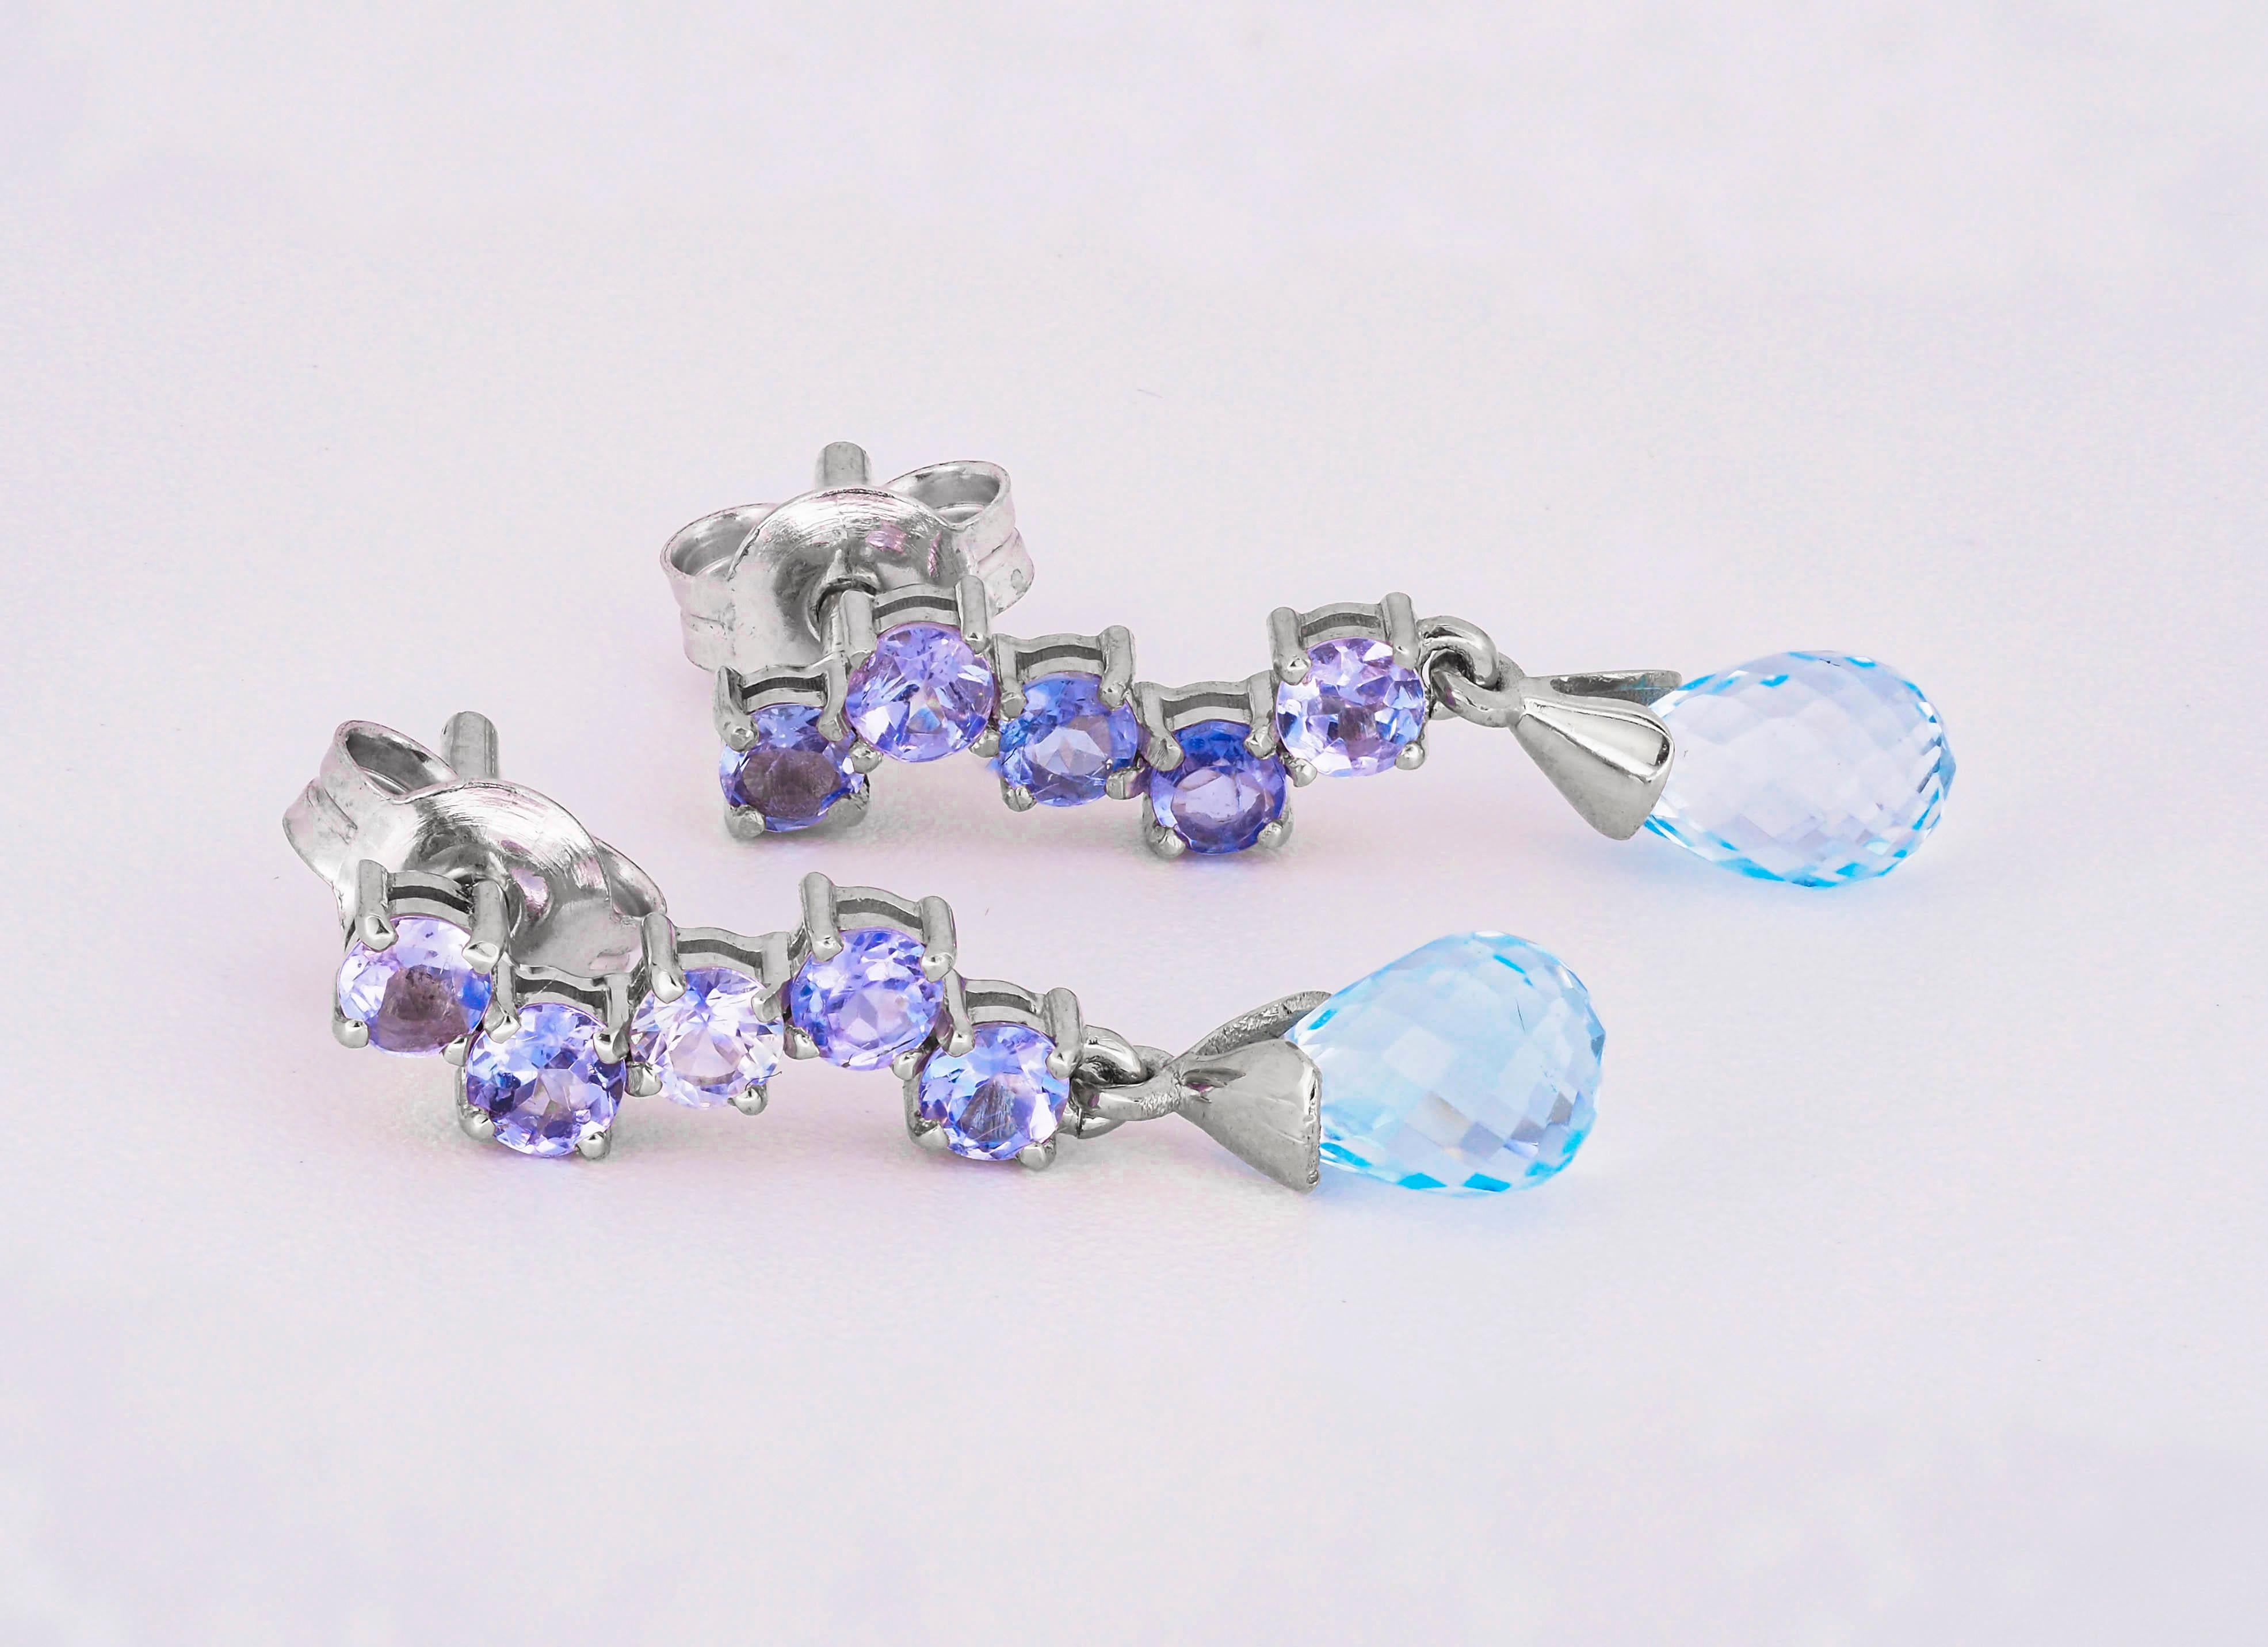 14 kt solid gold earrings with natural topazes and tanzanites
Total weight: 2.20 g.
Size: 22 x 5 mm.

Central stones: Natural topaz 
Weight: approx 2.00 ct total, 2 pieces, cut - briolettes
Color: blue, clarity - transparent with inclusions
Side